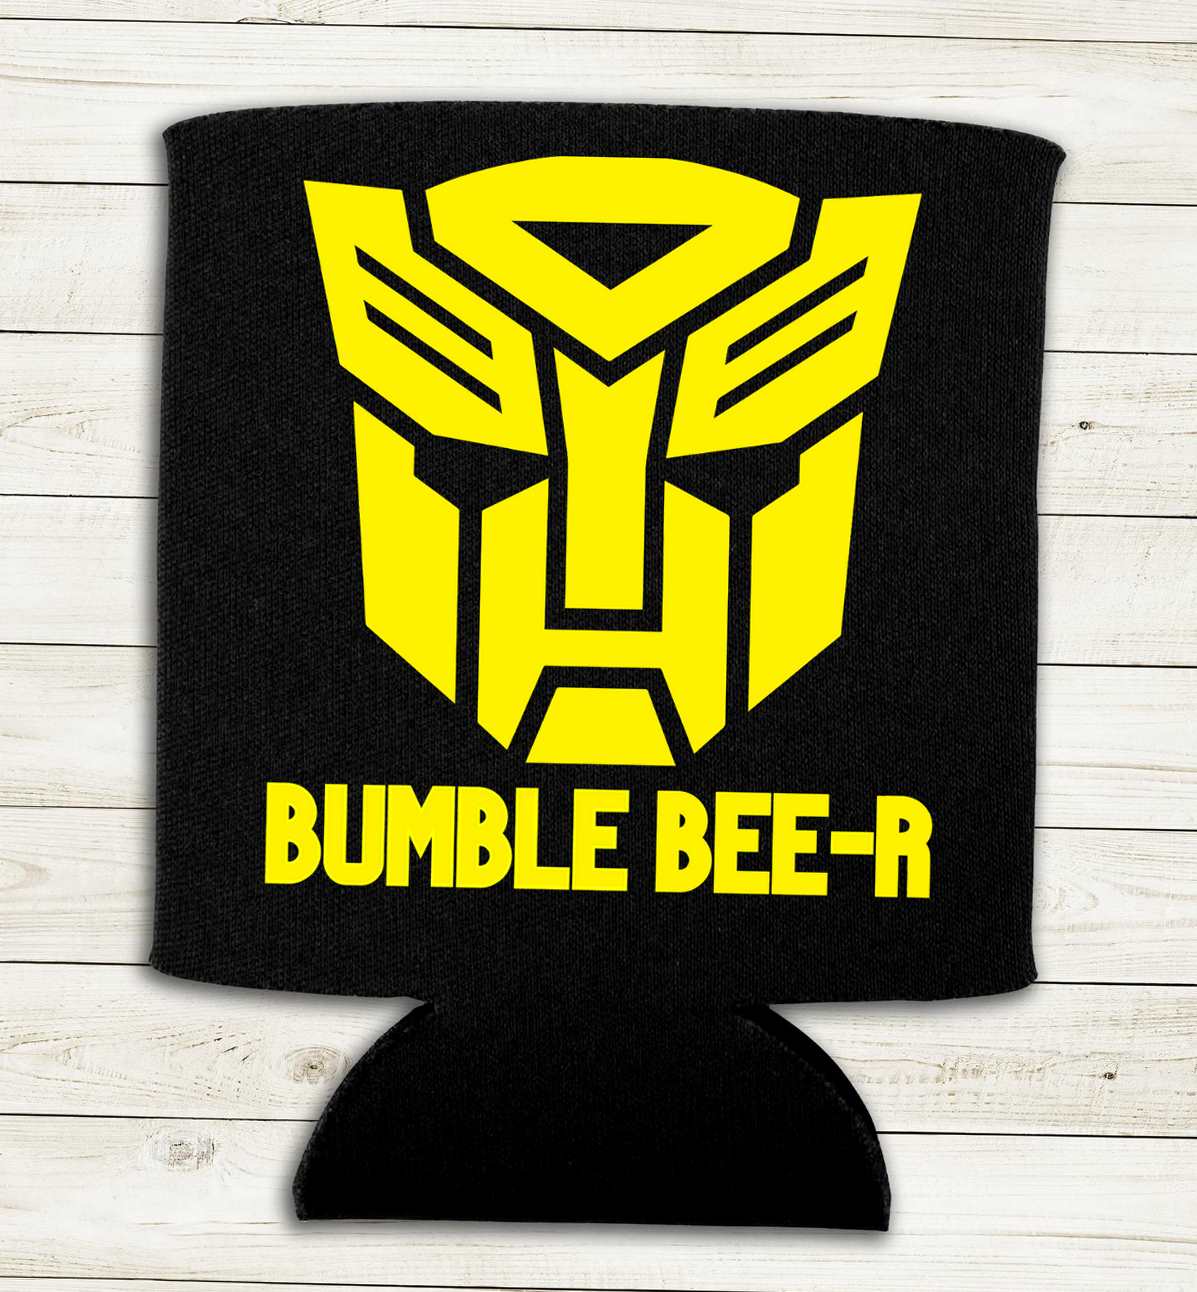 Bumble Bee-R - Can Cooler Koozie